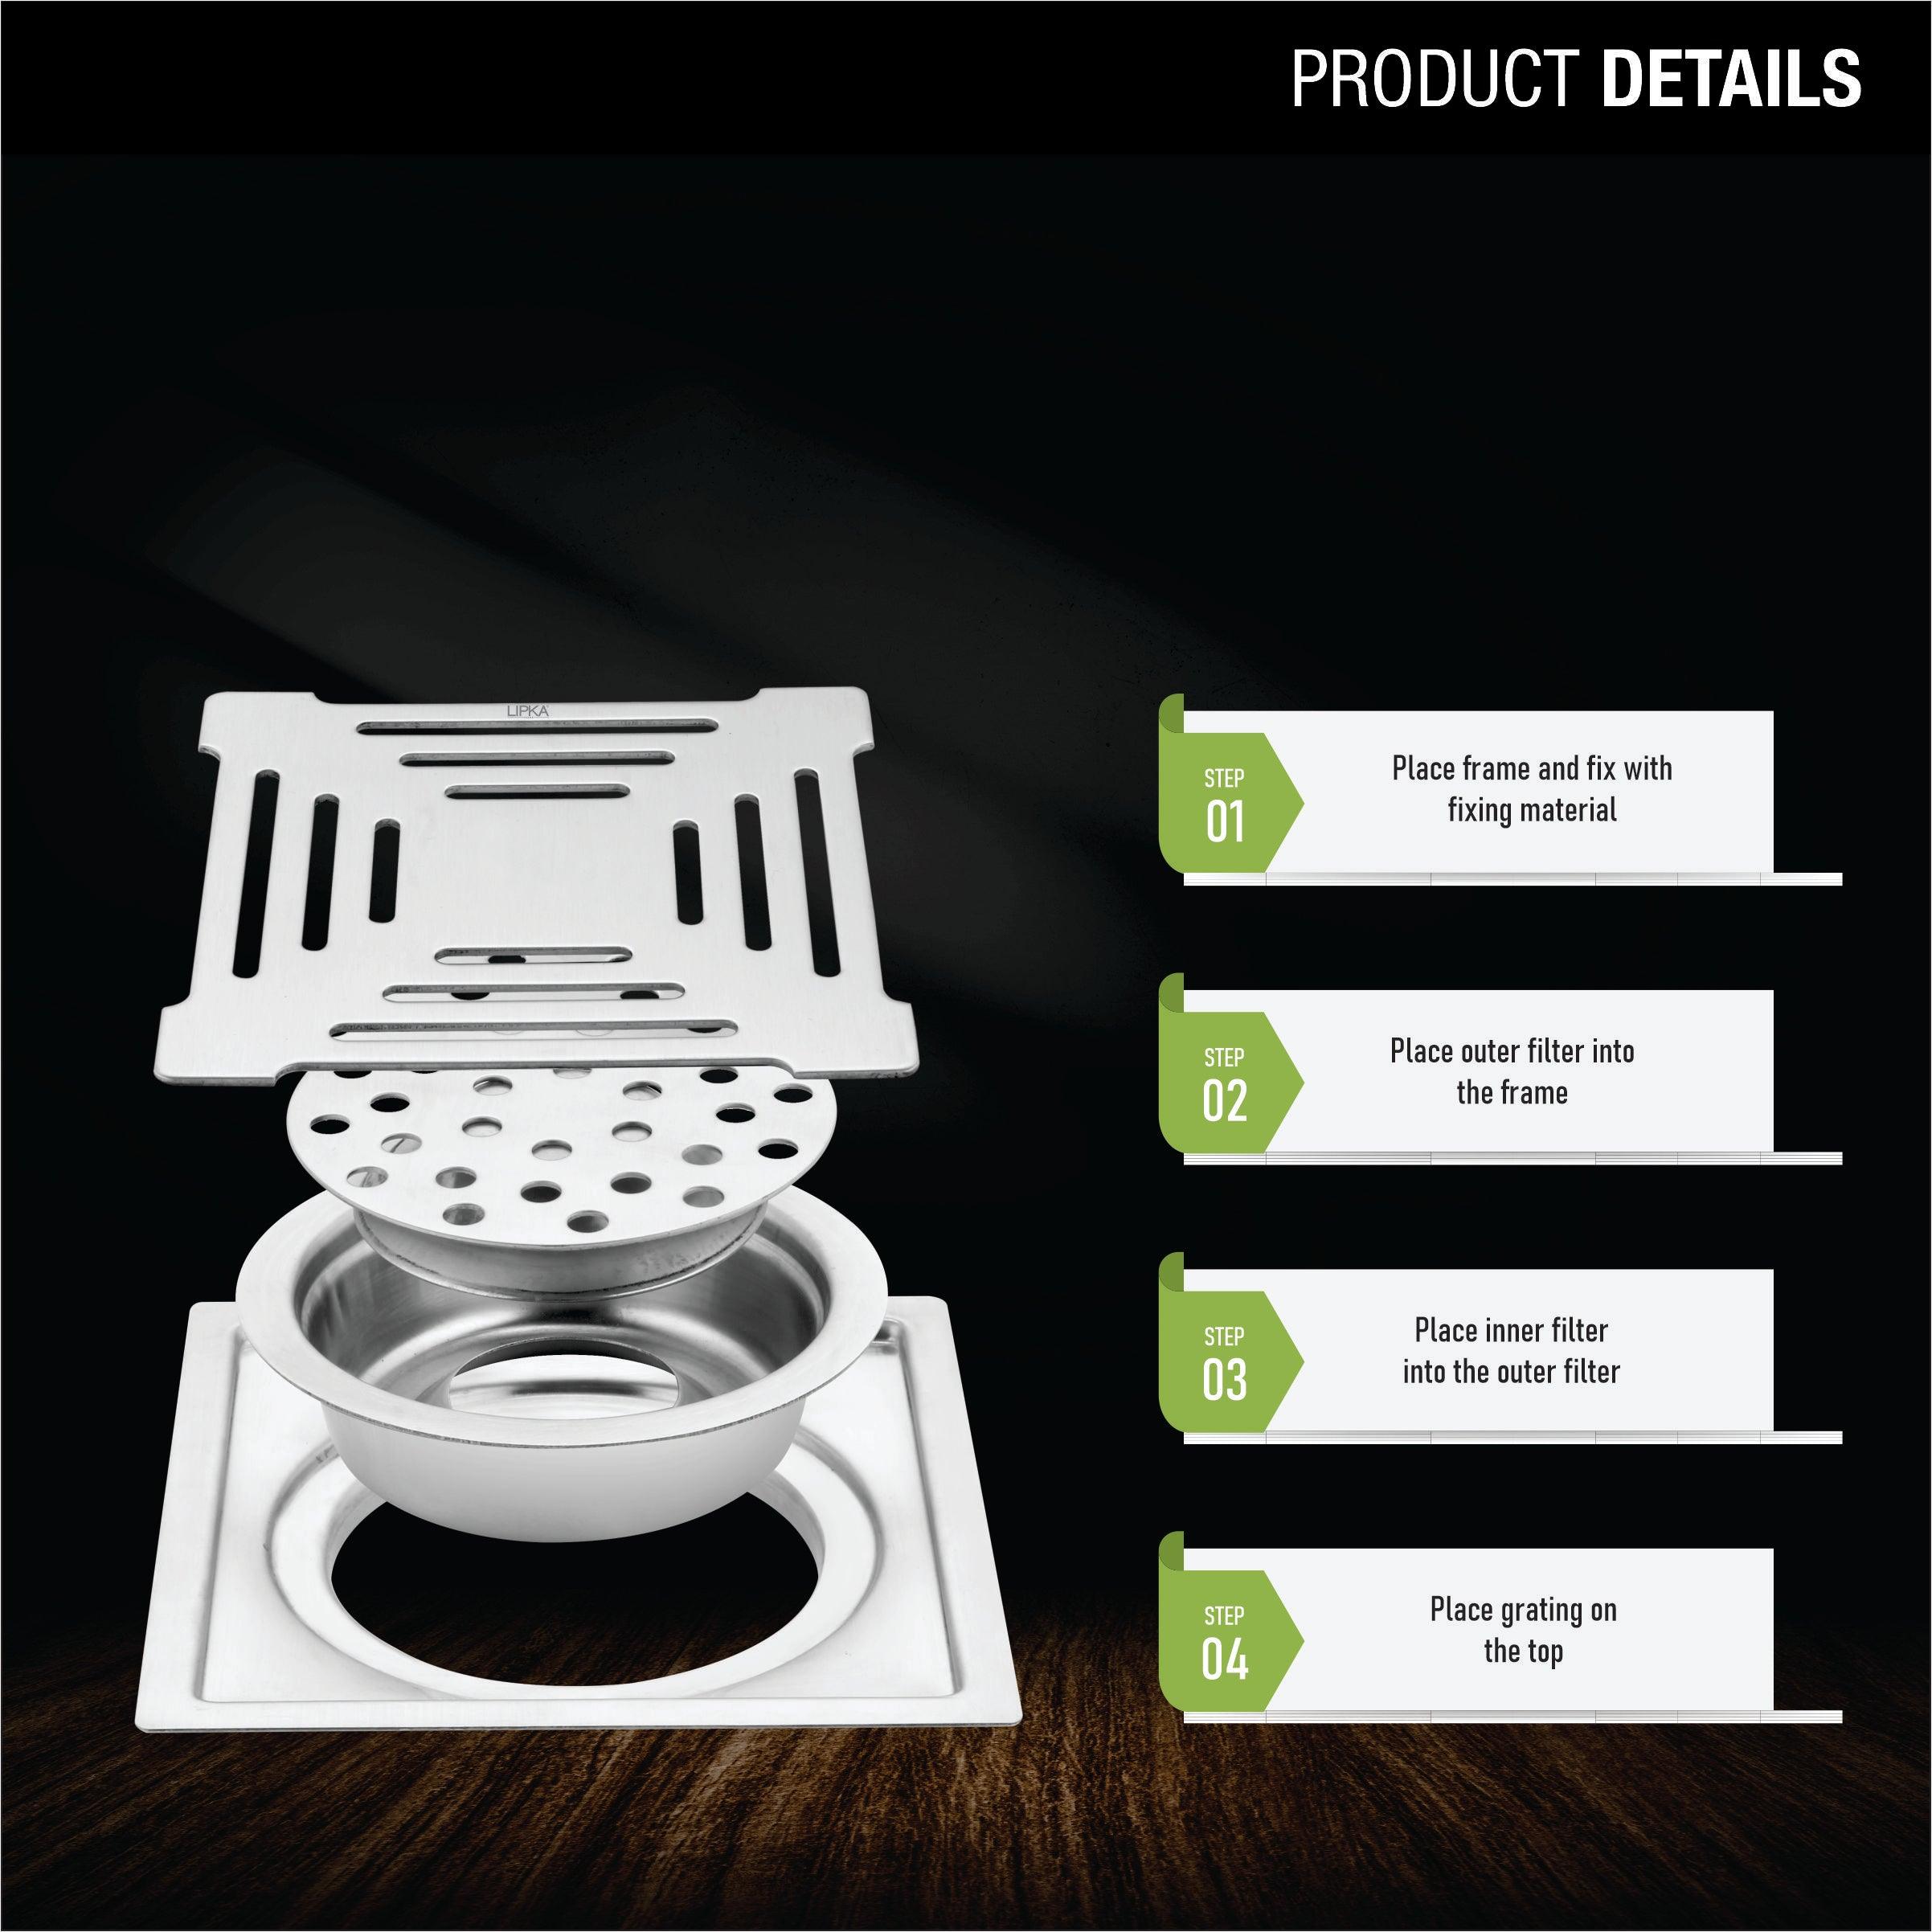 Green Exclusive Square Flat Cut Floor Drain (6 x 6 Inches) with Cockroach Trap product details